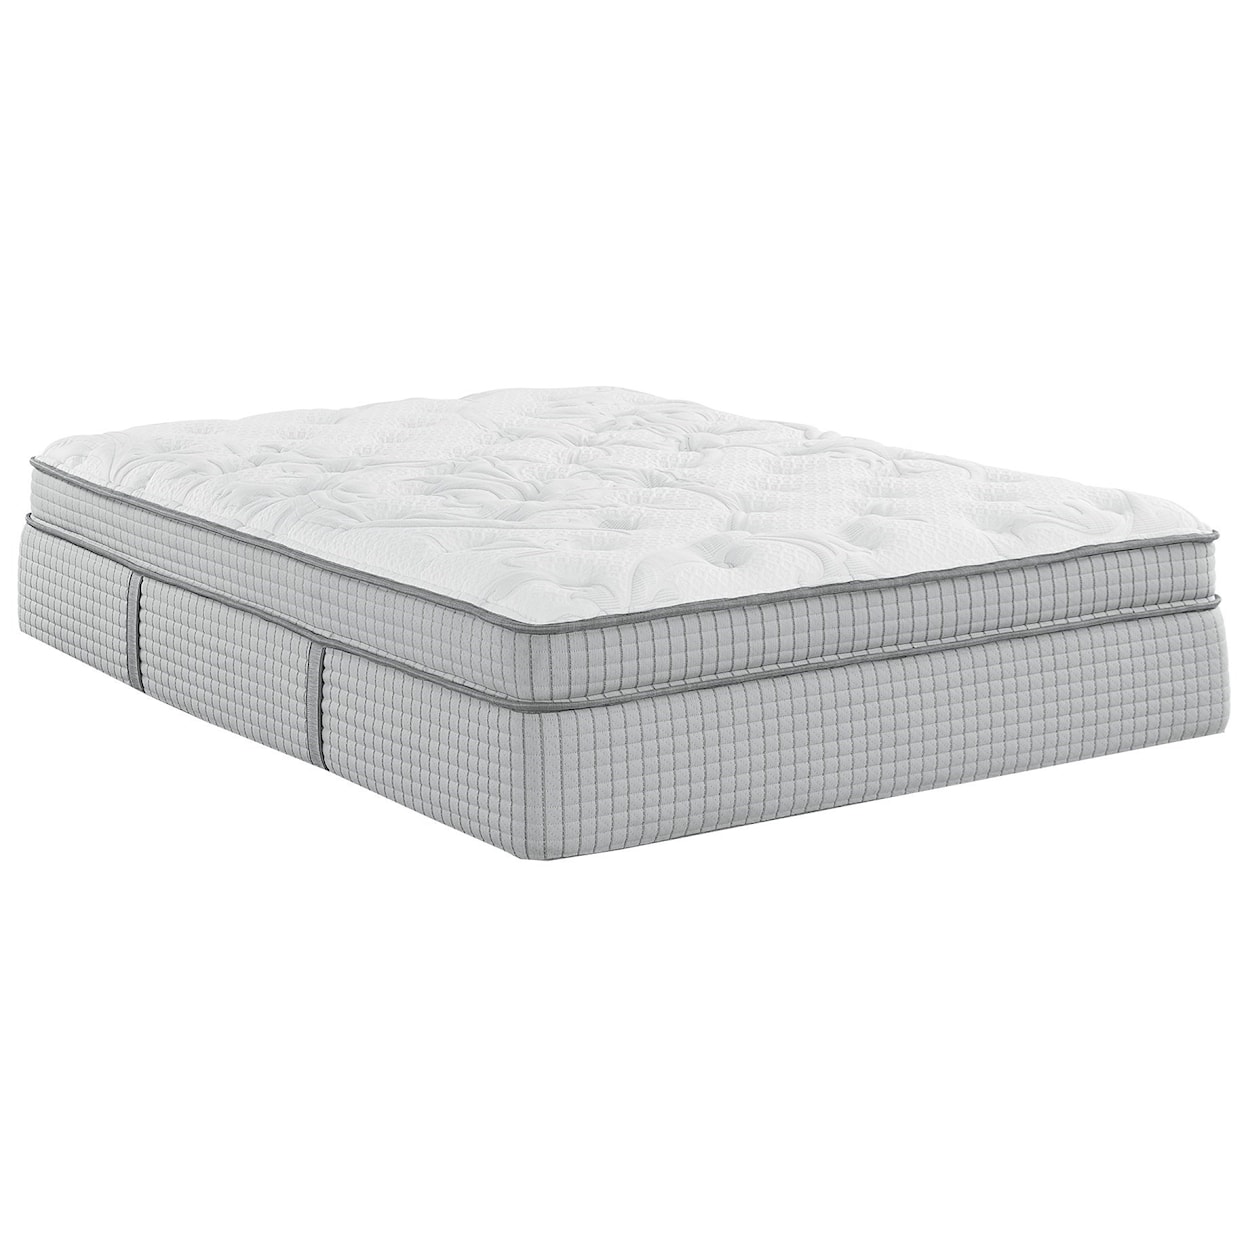 Restonic Biltmore House Euro Top Queen Euro Top Coil on Coil Mattress